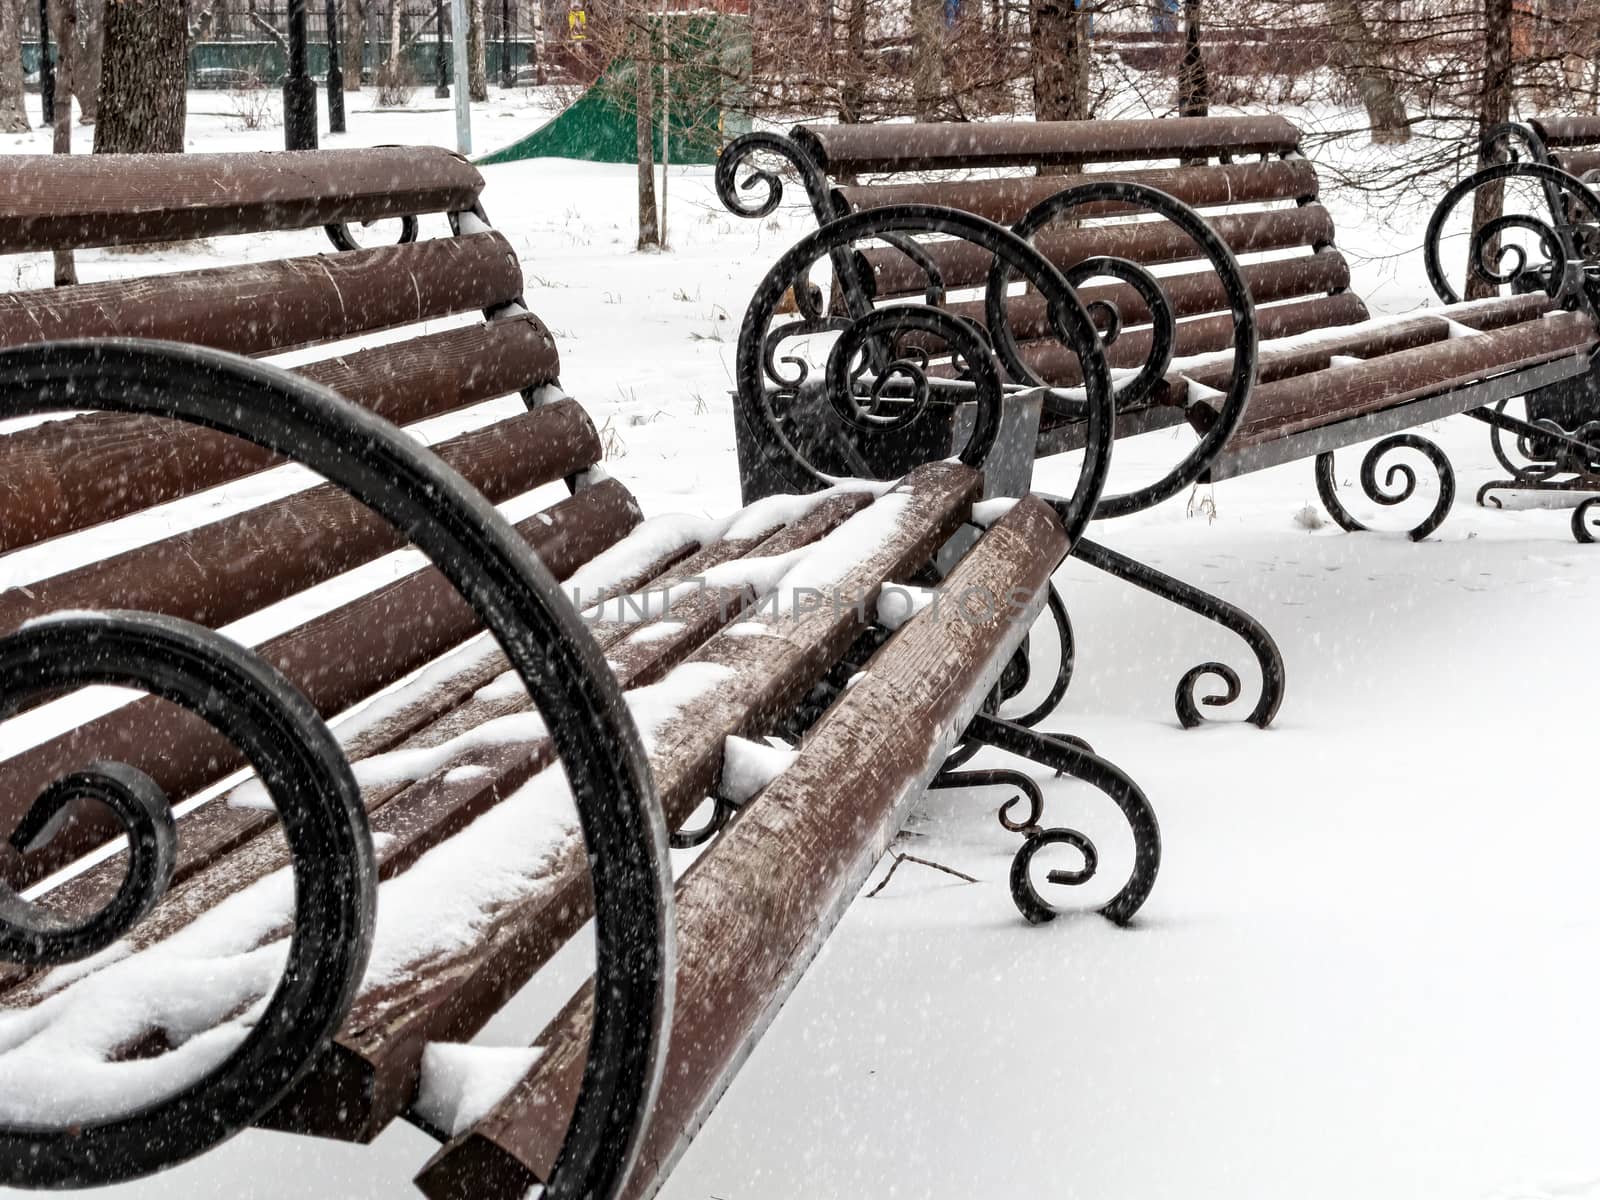 Empty red park benches covered in snow. Winter day in the park. Snowing.